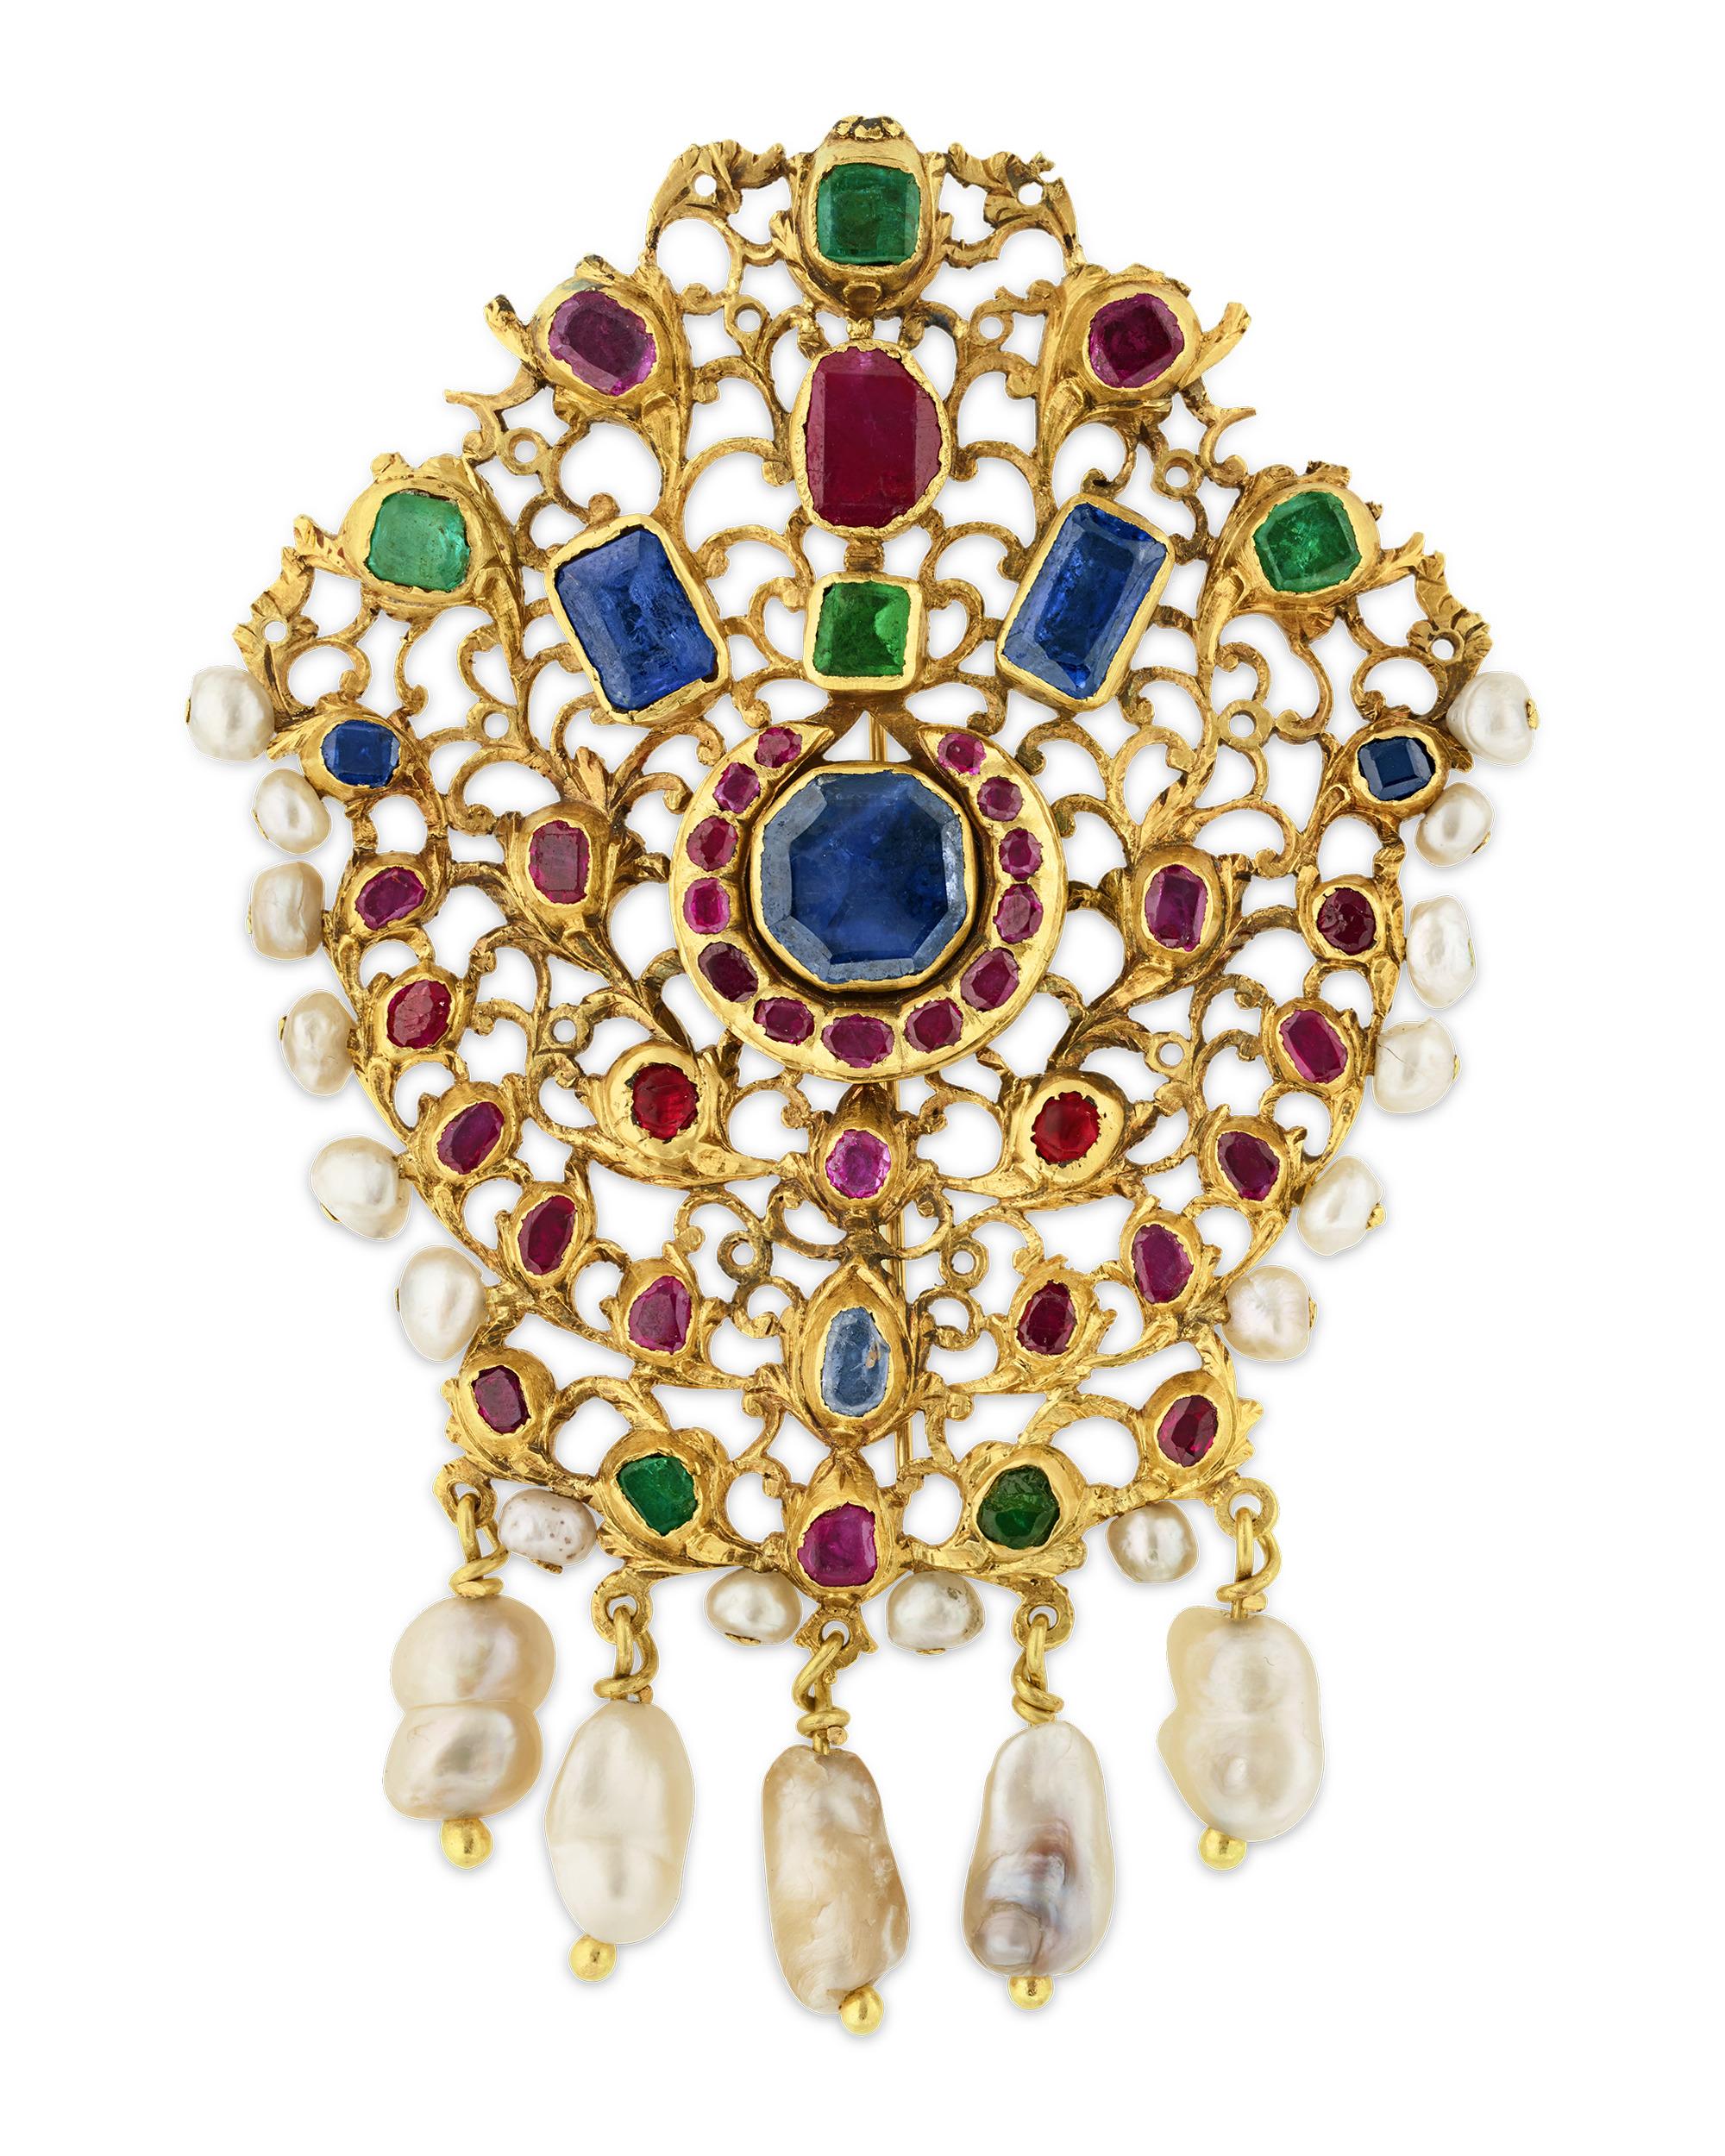 Mughal Colored Gemstone And Pearl Pendant Brooch In Excellent Condition For Sale In New Orleans, LA